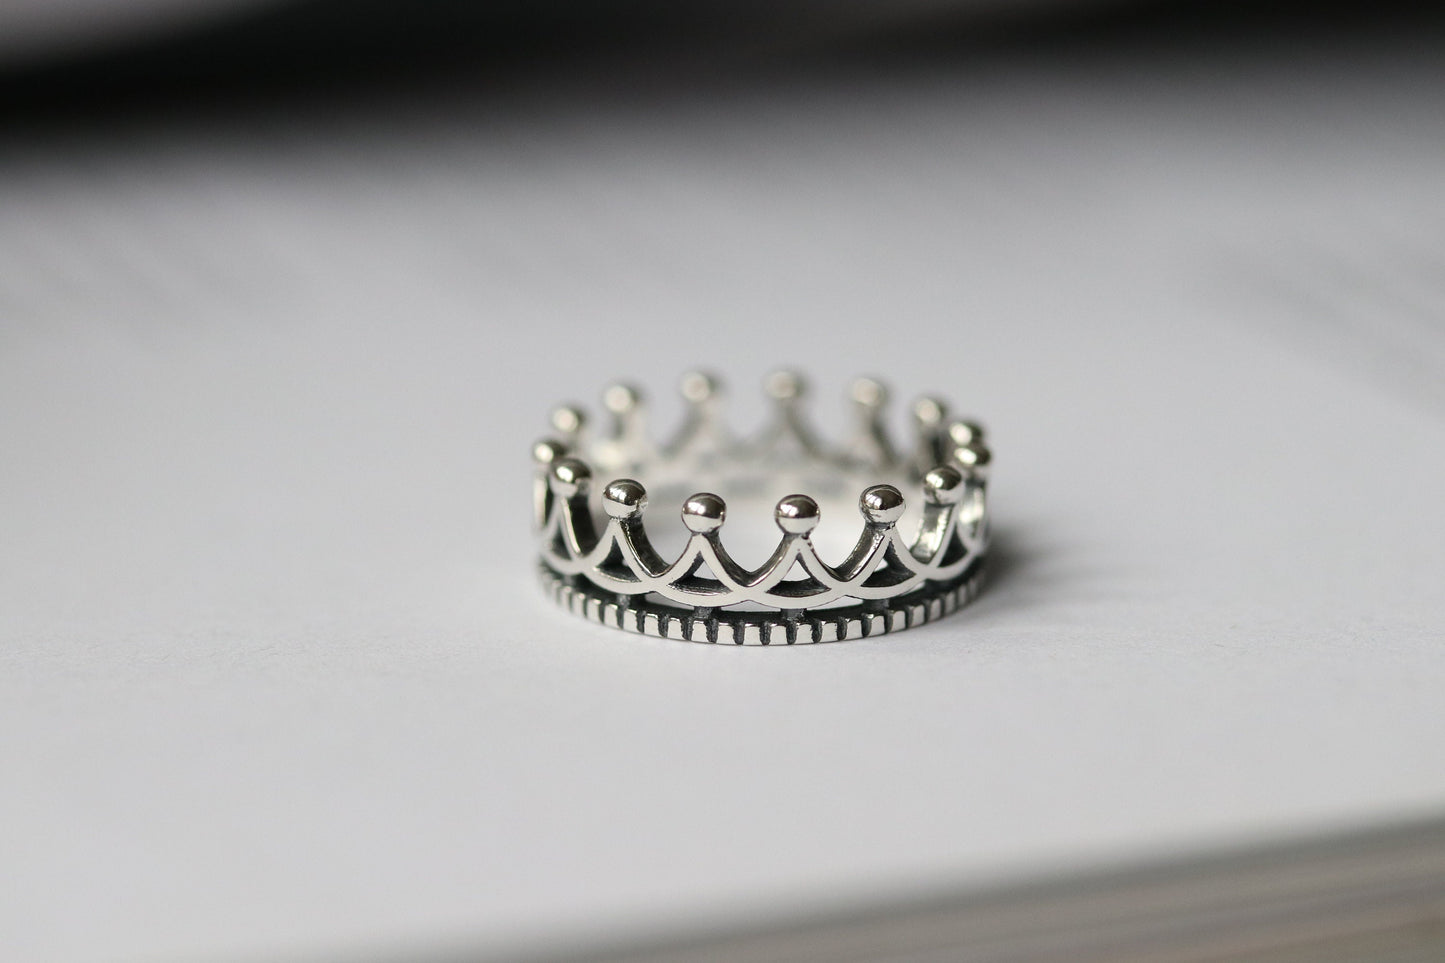 Handmade Crown Ring in Sterling Silver, Adjustable Vintage Polished Crown Open Ring, Minimalist Adjustable Stackable Ring, Gift for Her